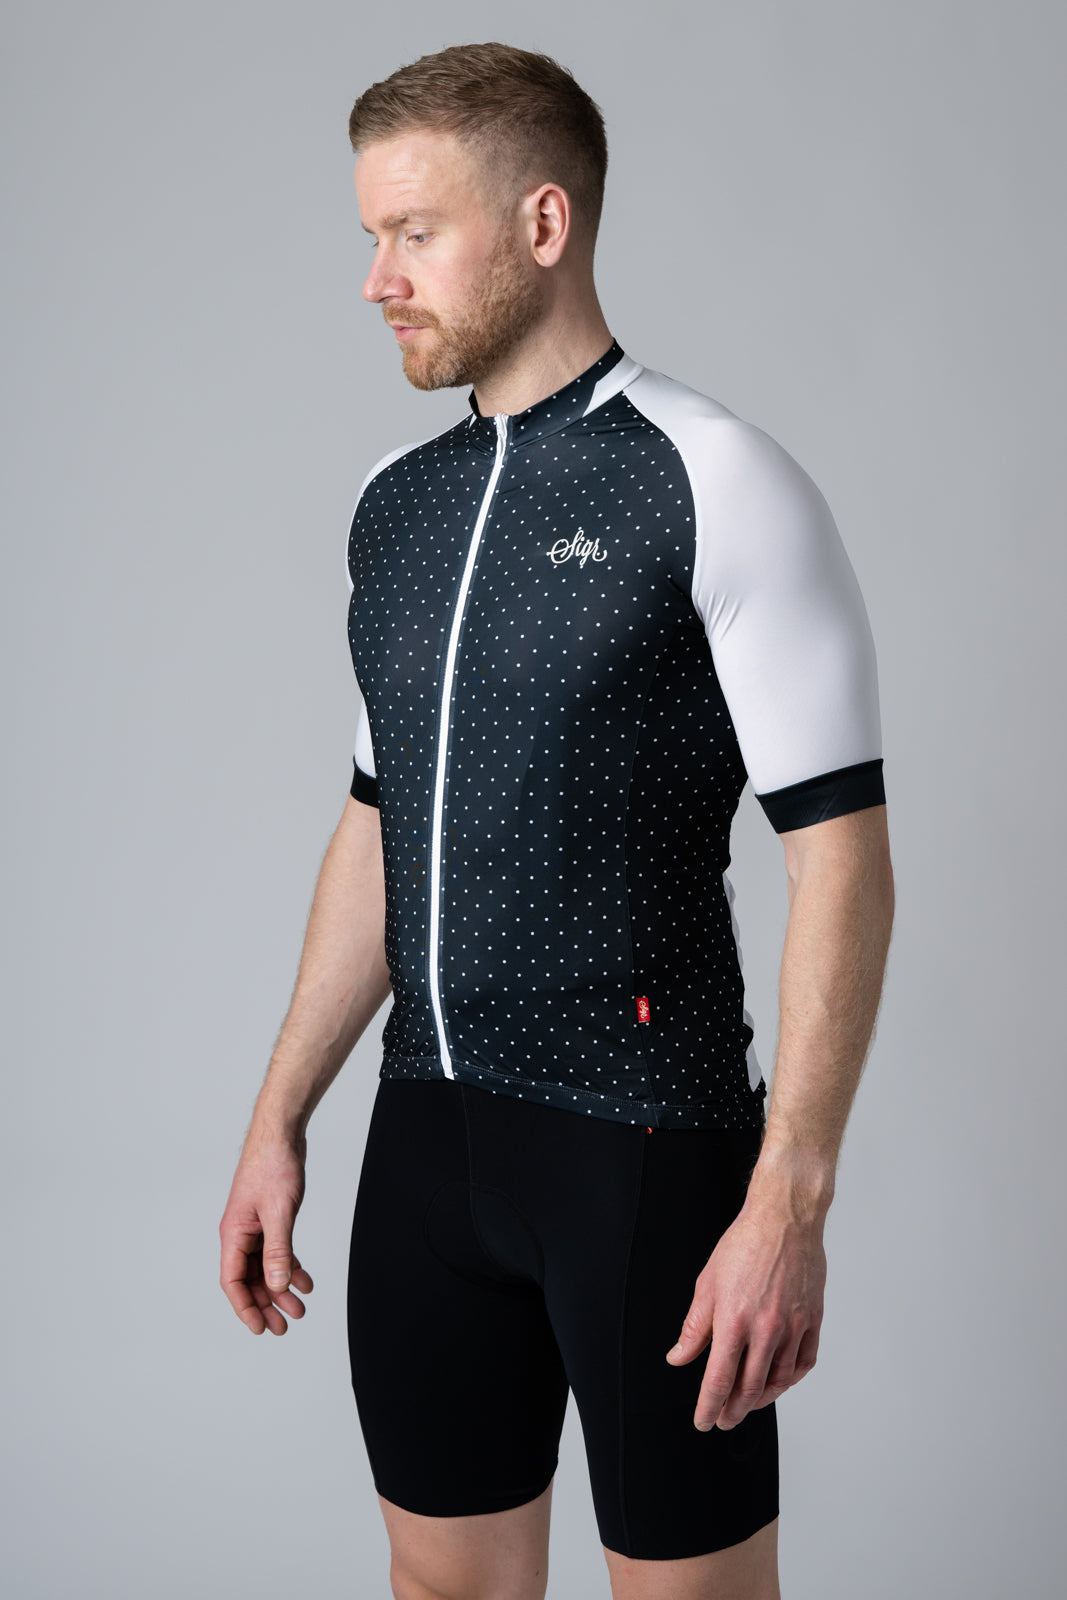 Black Legacy - Road Cycling Jersey for Men